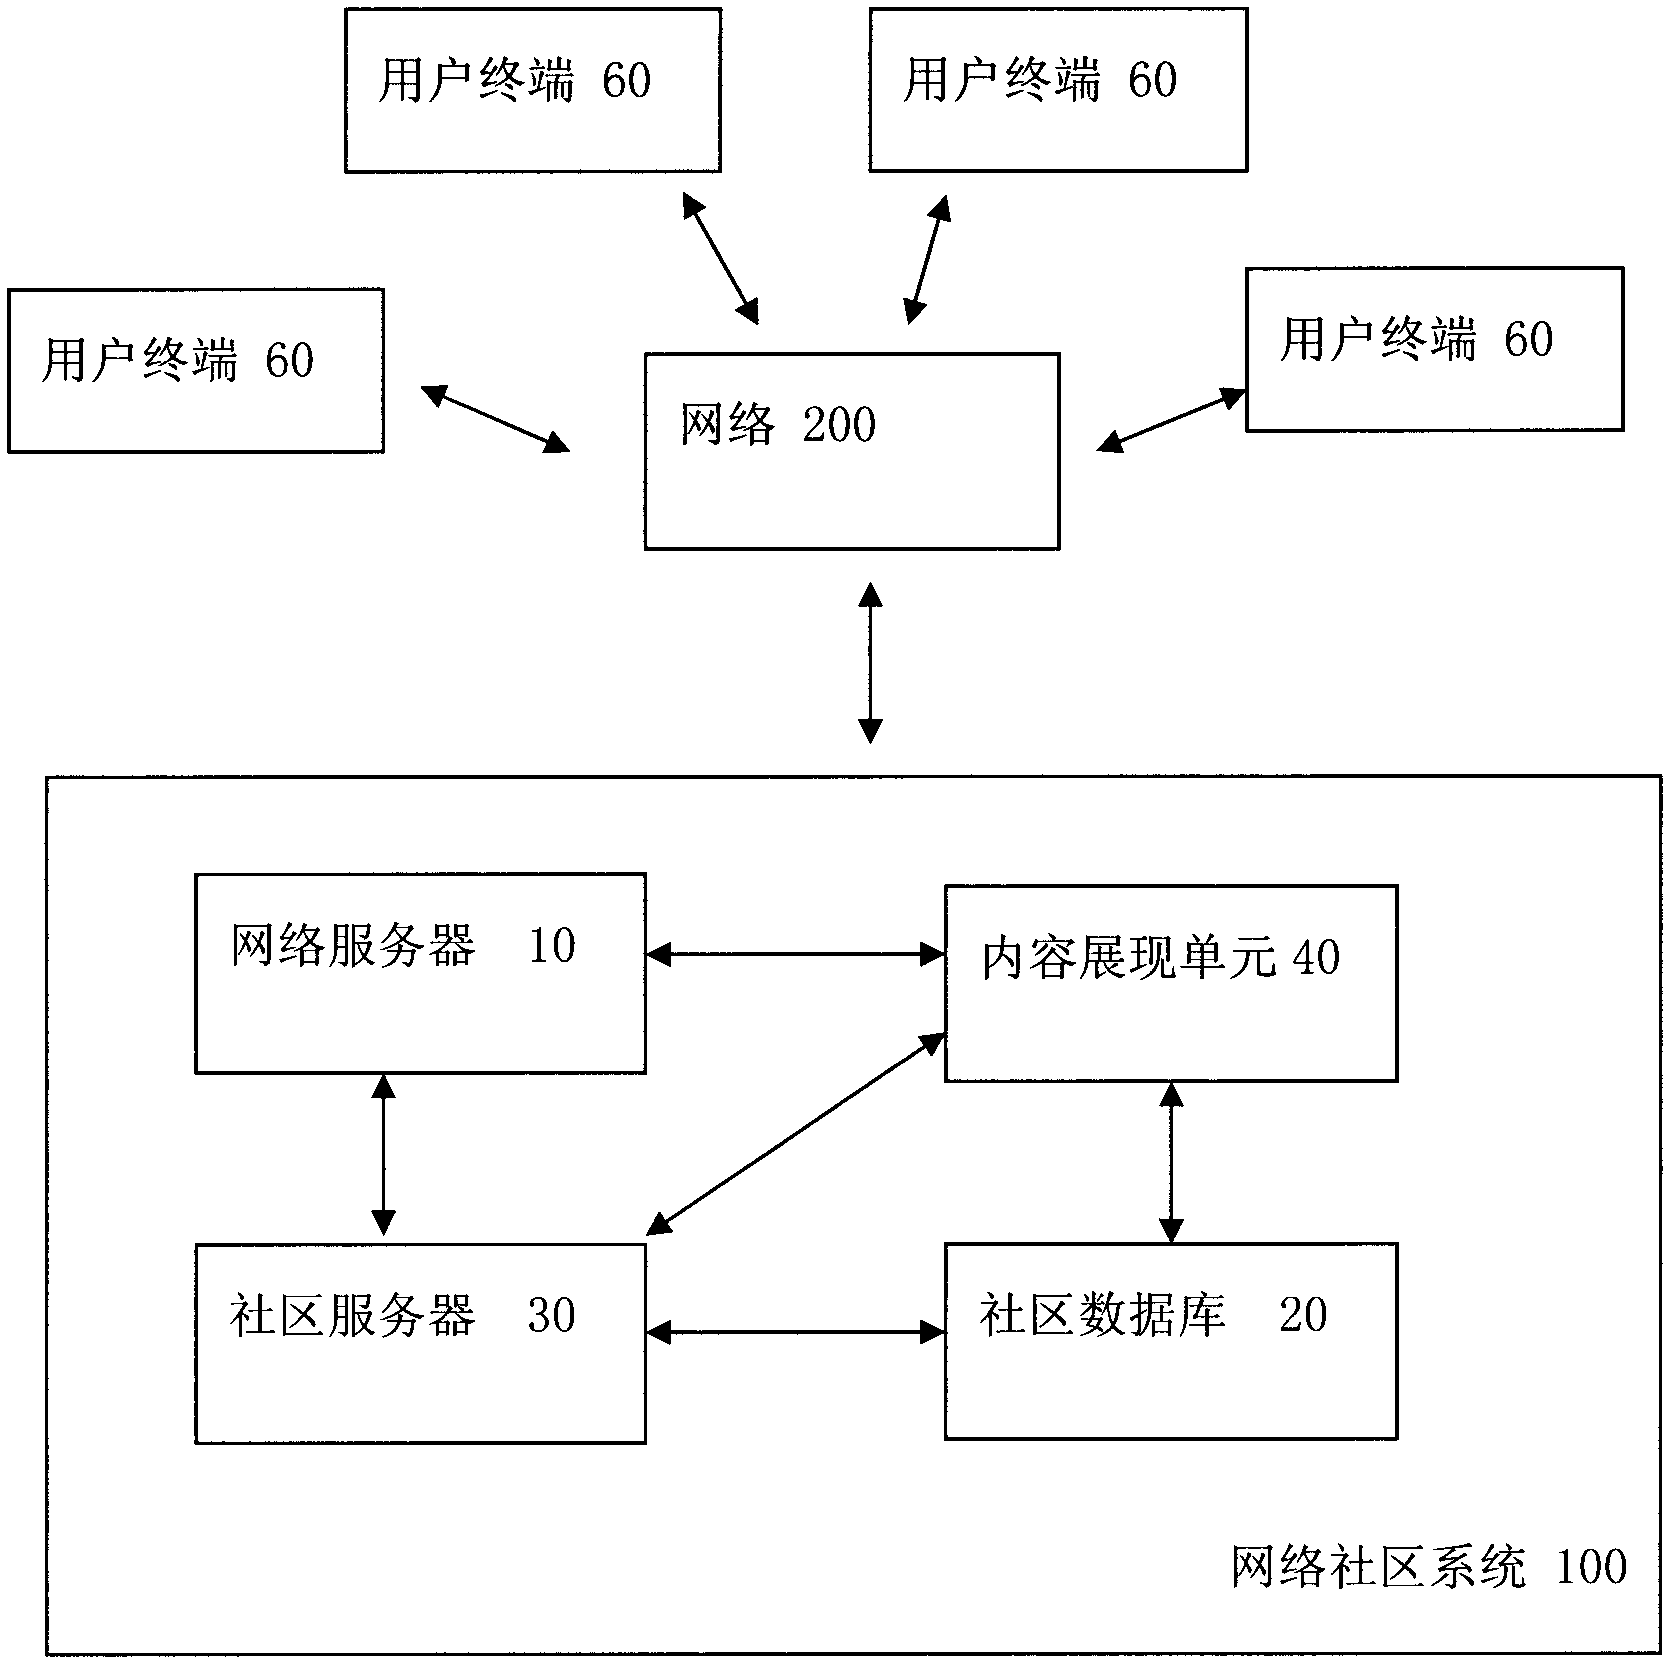 Display unit and display method for updated contents of network community